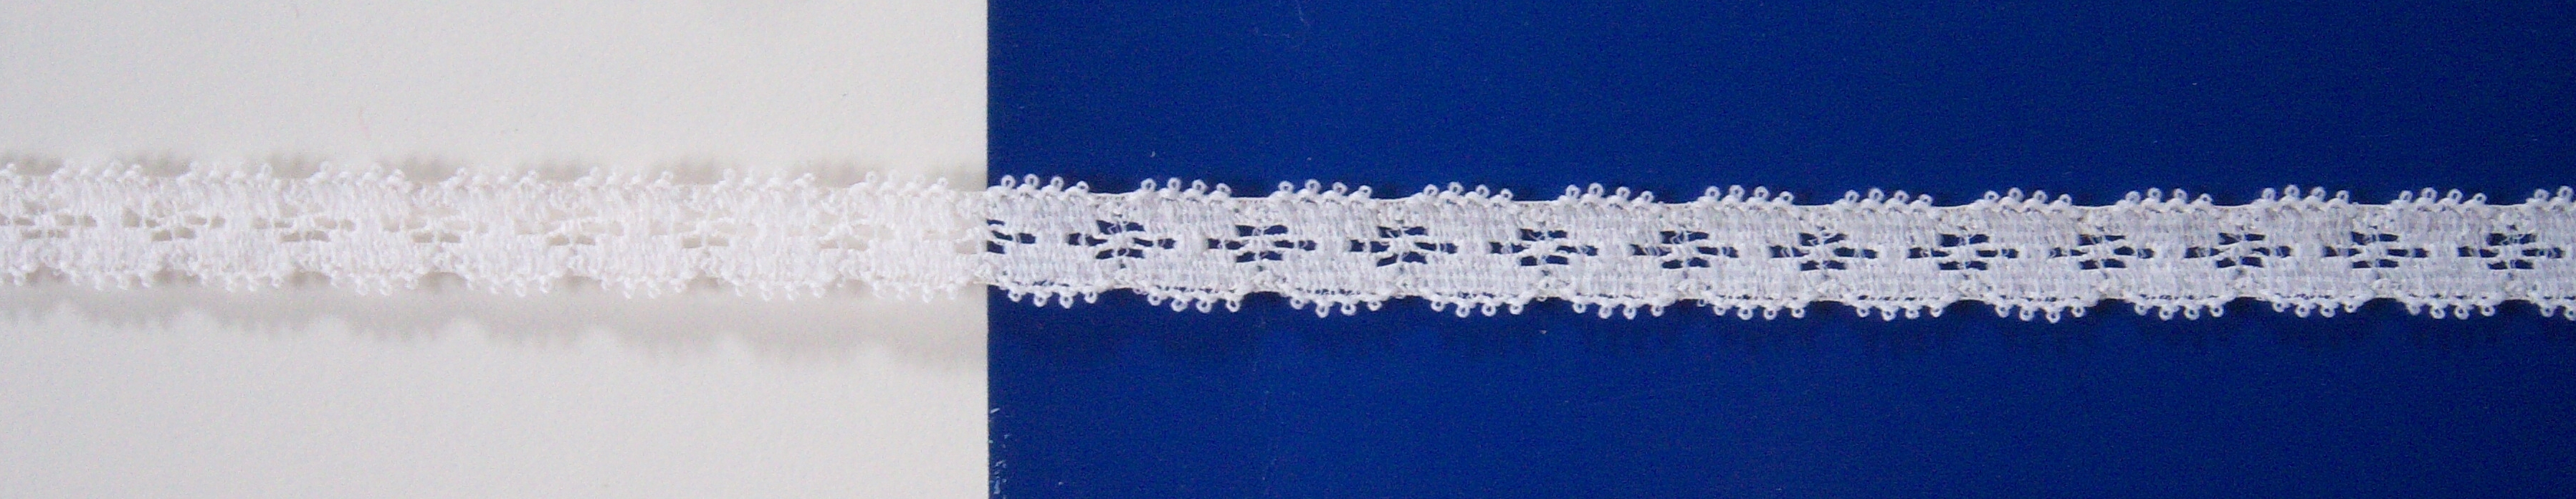 Off White 7/16" Stretch Lace